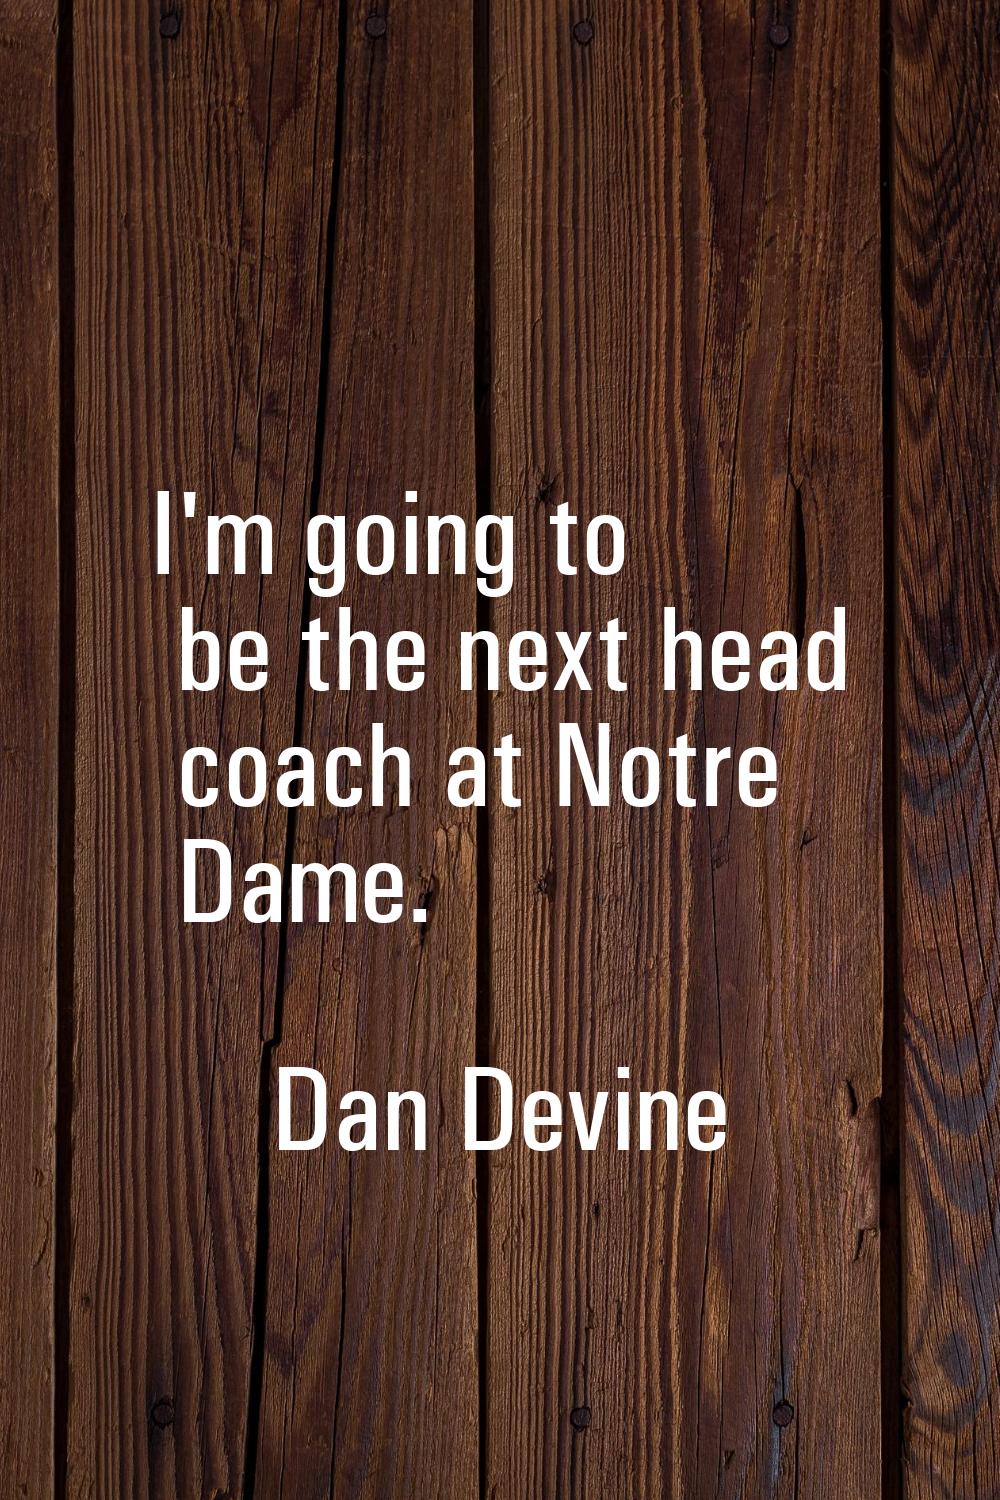 I'm going to be the next head coach at Notre Dame.